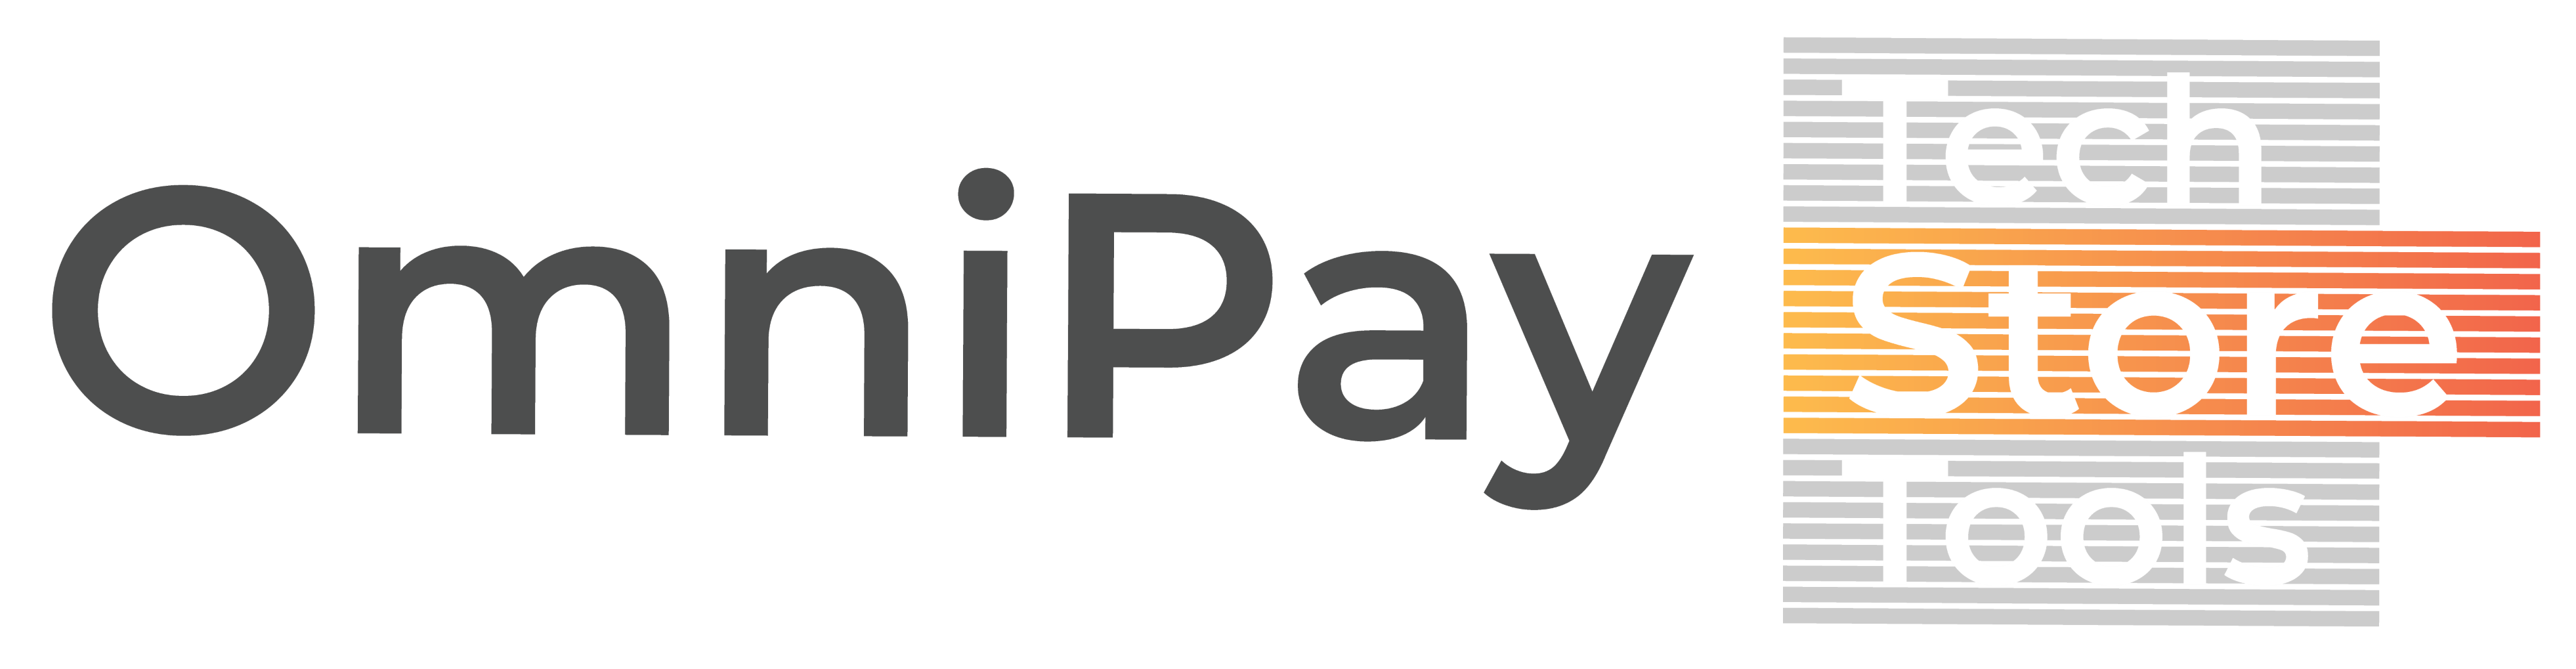 OmniPay